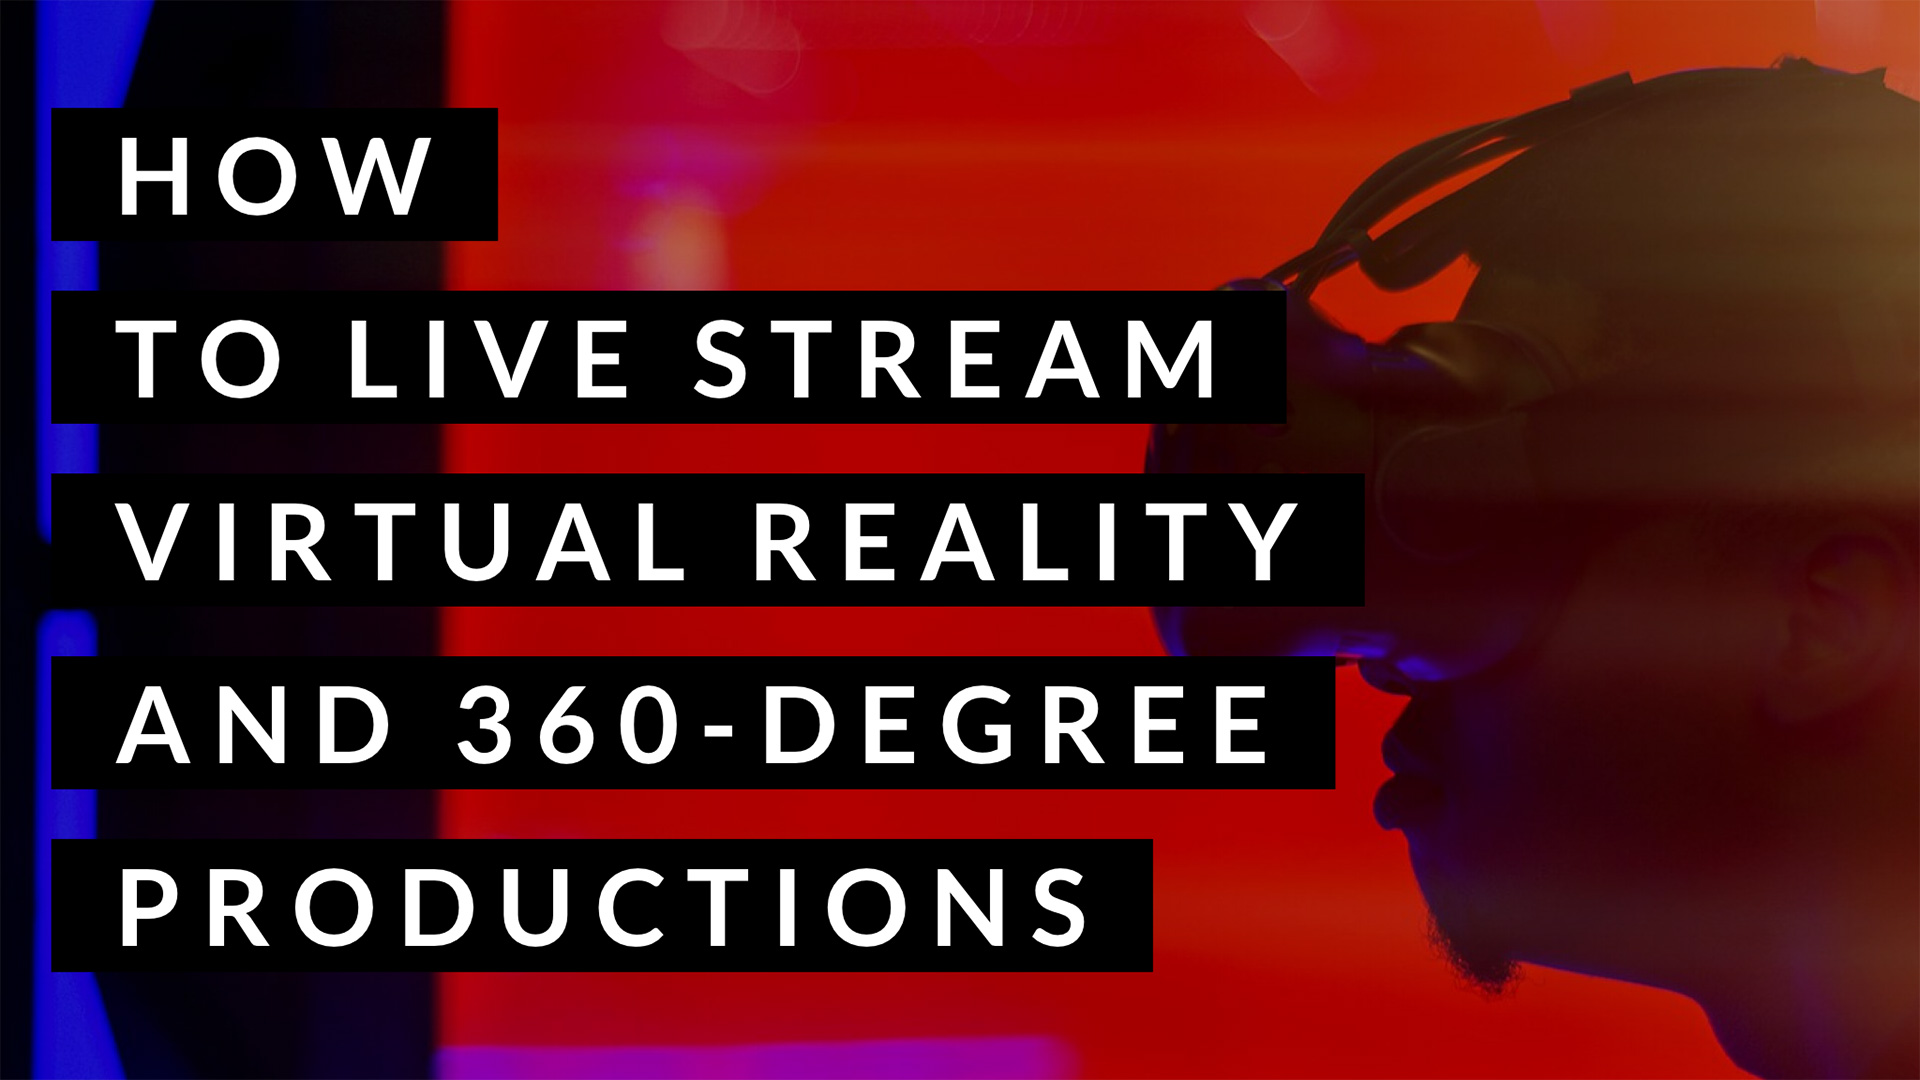 Benefits of Having the 360 Degree Live Streaming Video App